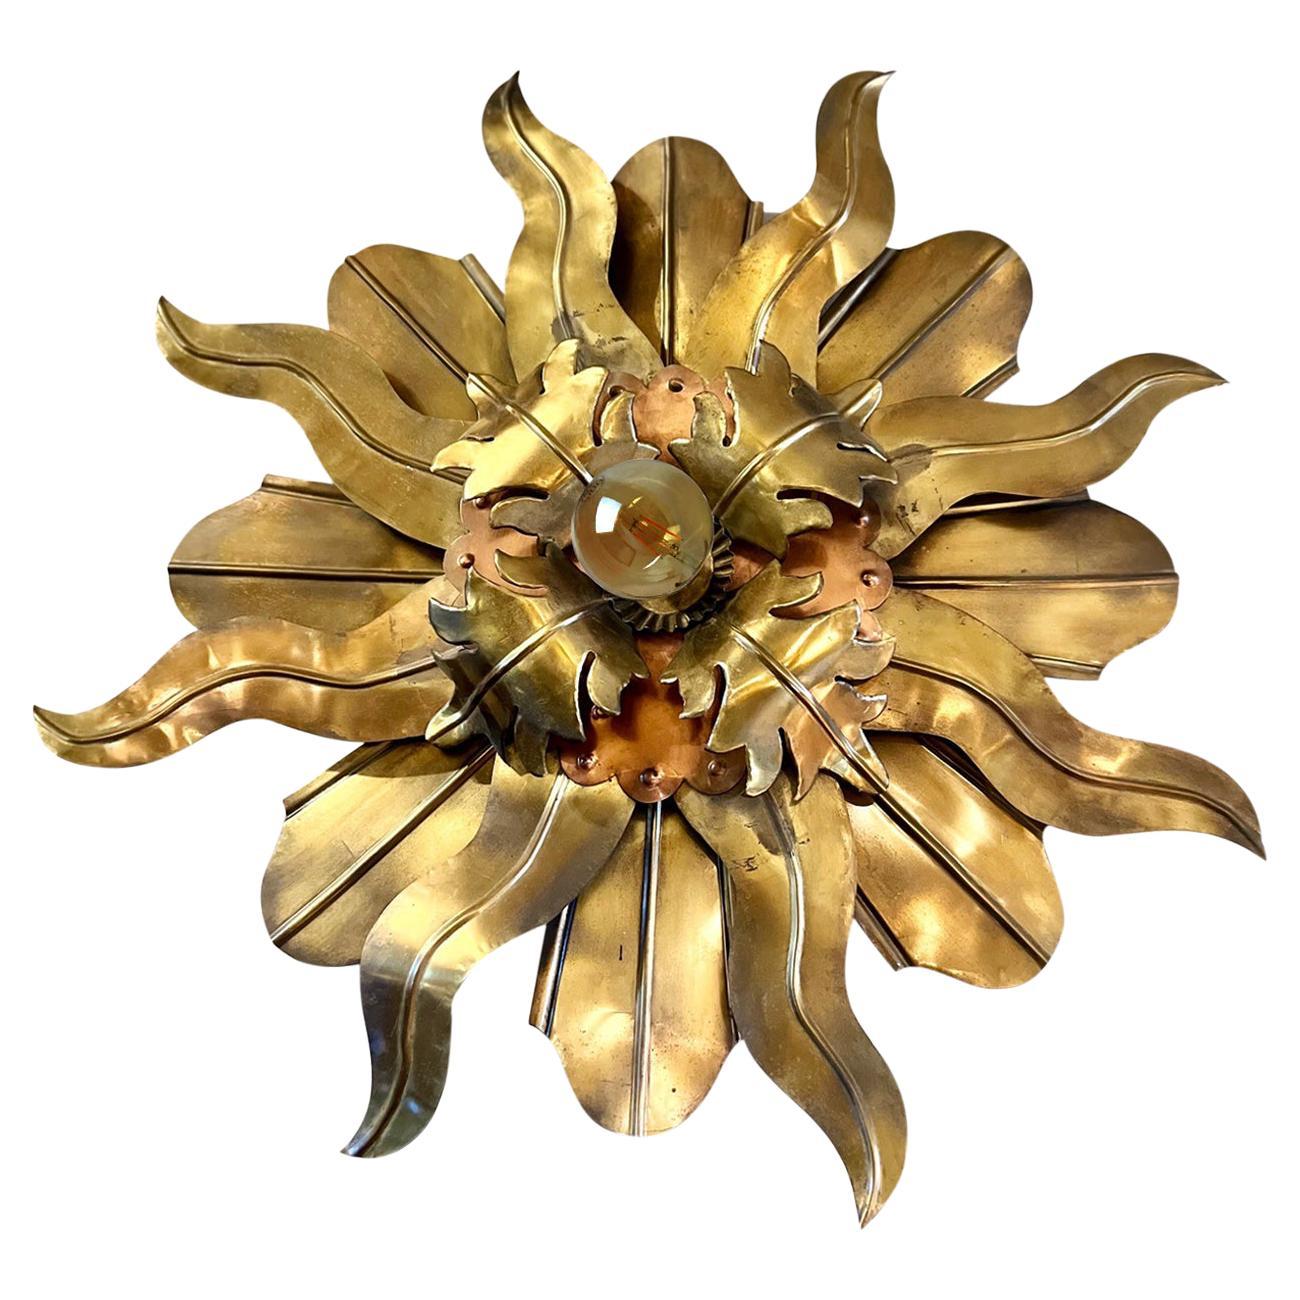 Eye-catching gilt wrought iron sunburst ceiling flush mount in the style of Brutalism. Manufactured in France, 1960s.
This hand-hammered kopper sunburst flush mount or wall sconce will be a nice mid century accent wherever you place it.
Gorgeous